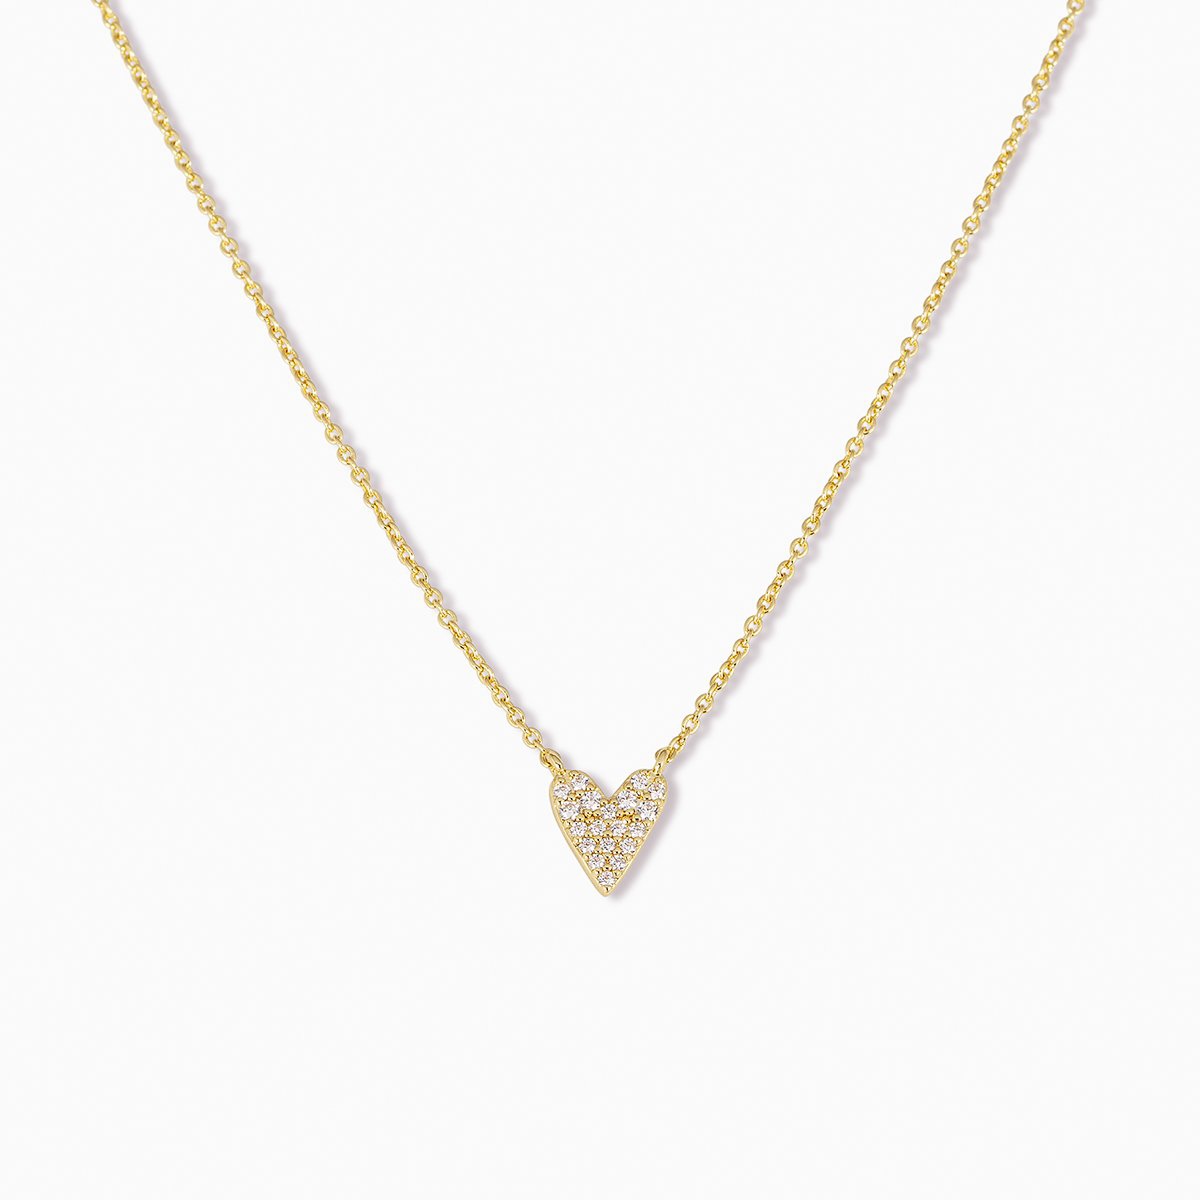 Uncommon James: Full Heart Necklace - Gold